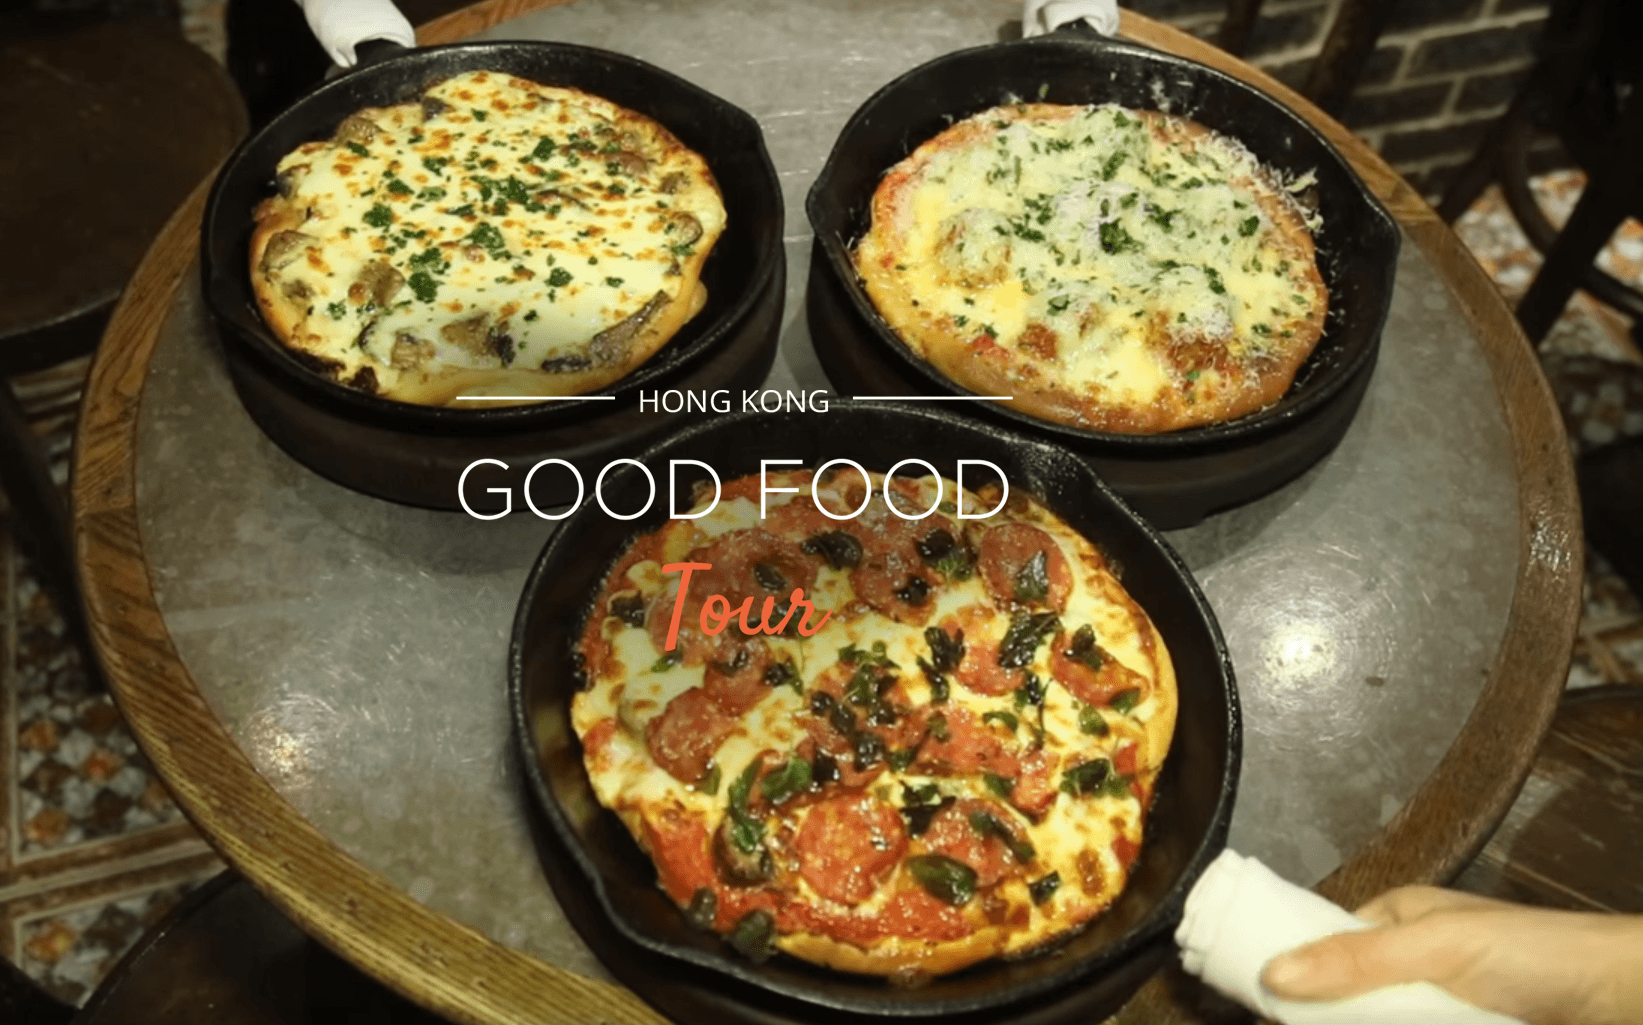 The good food tour - pizza